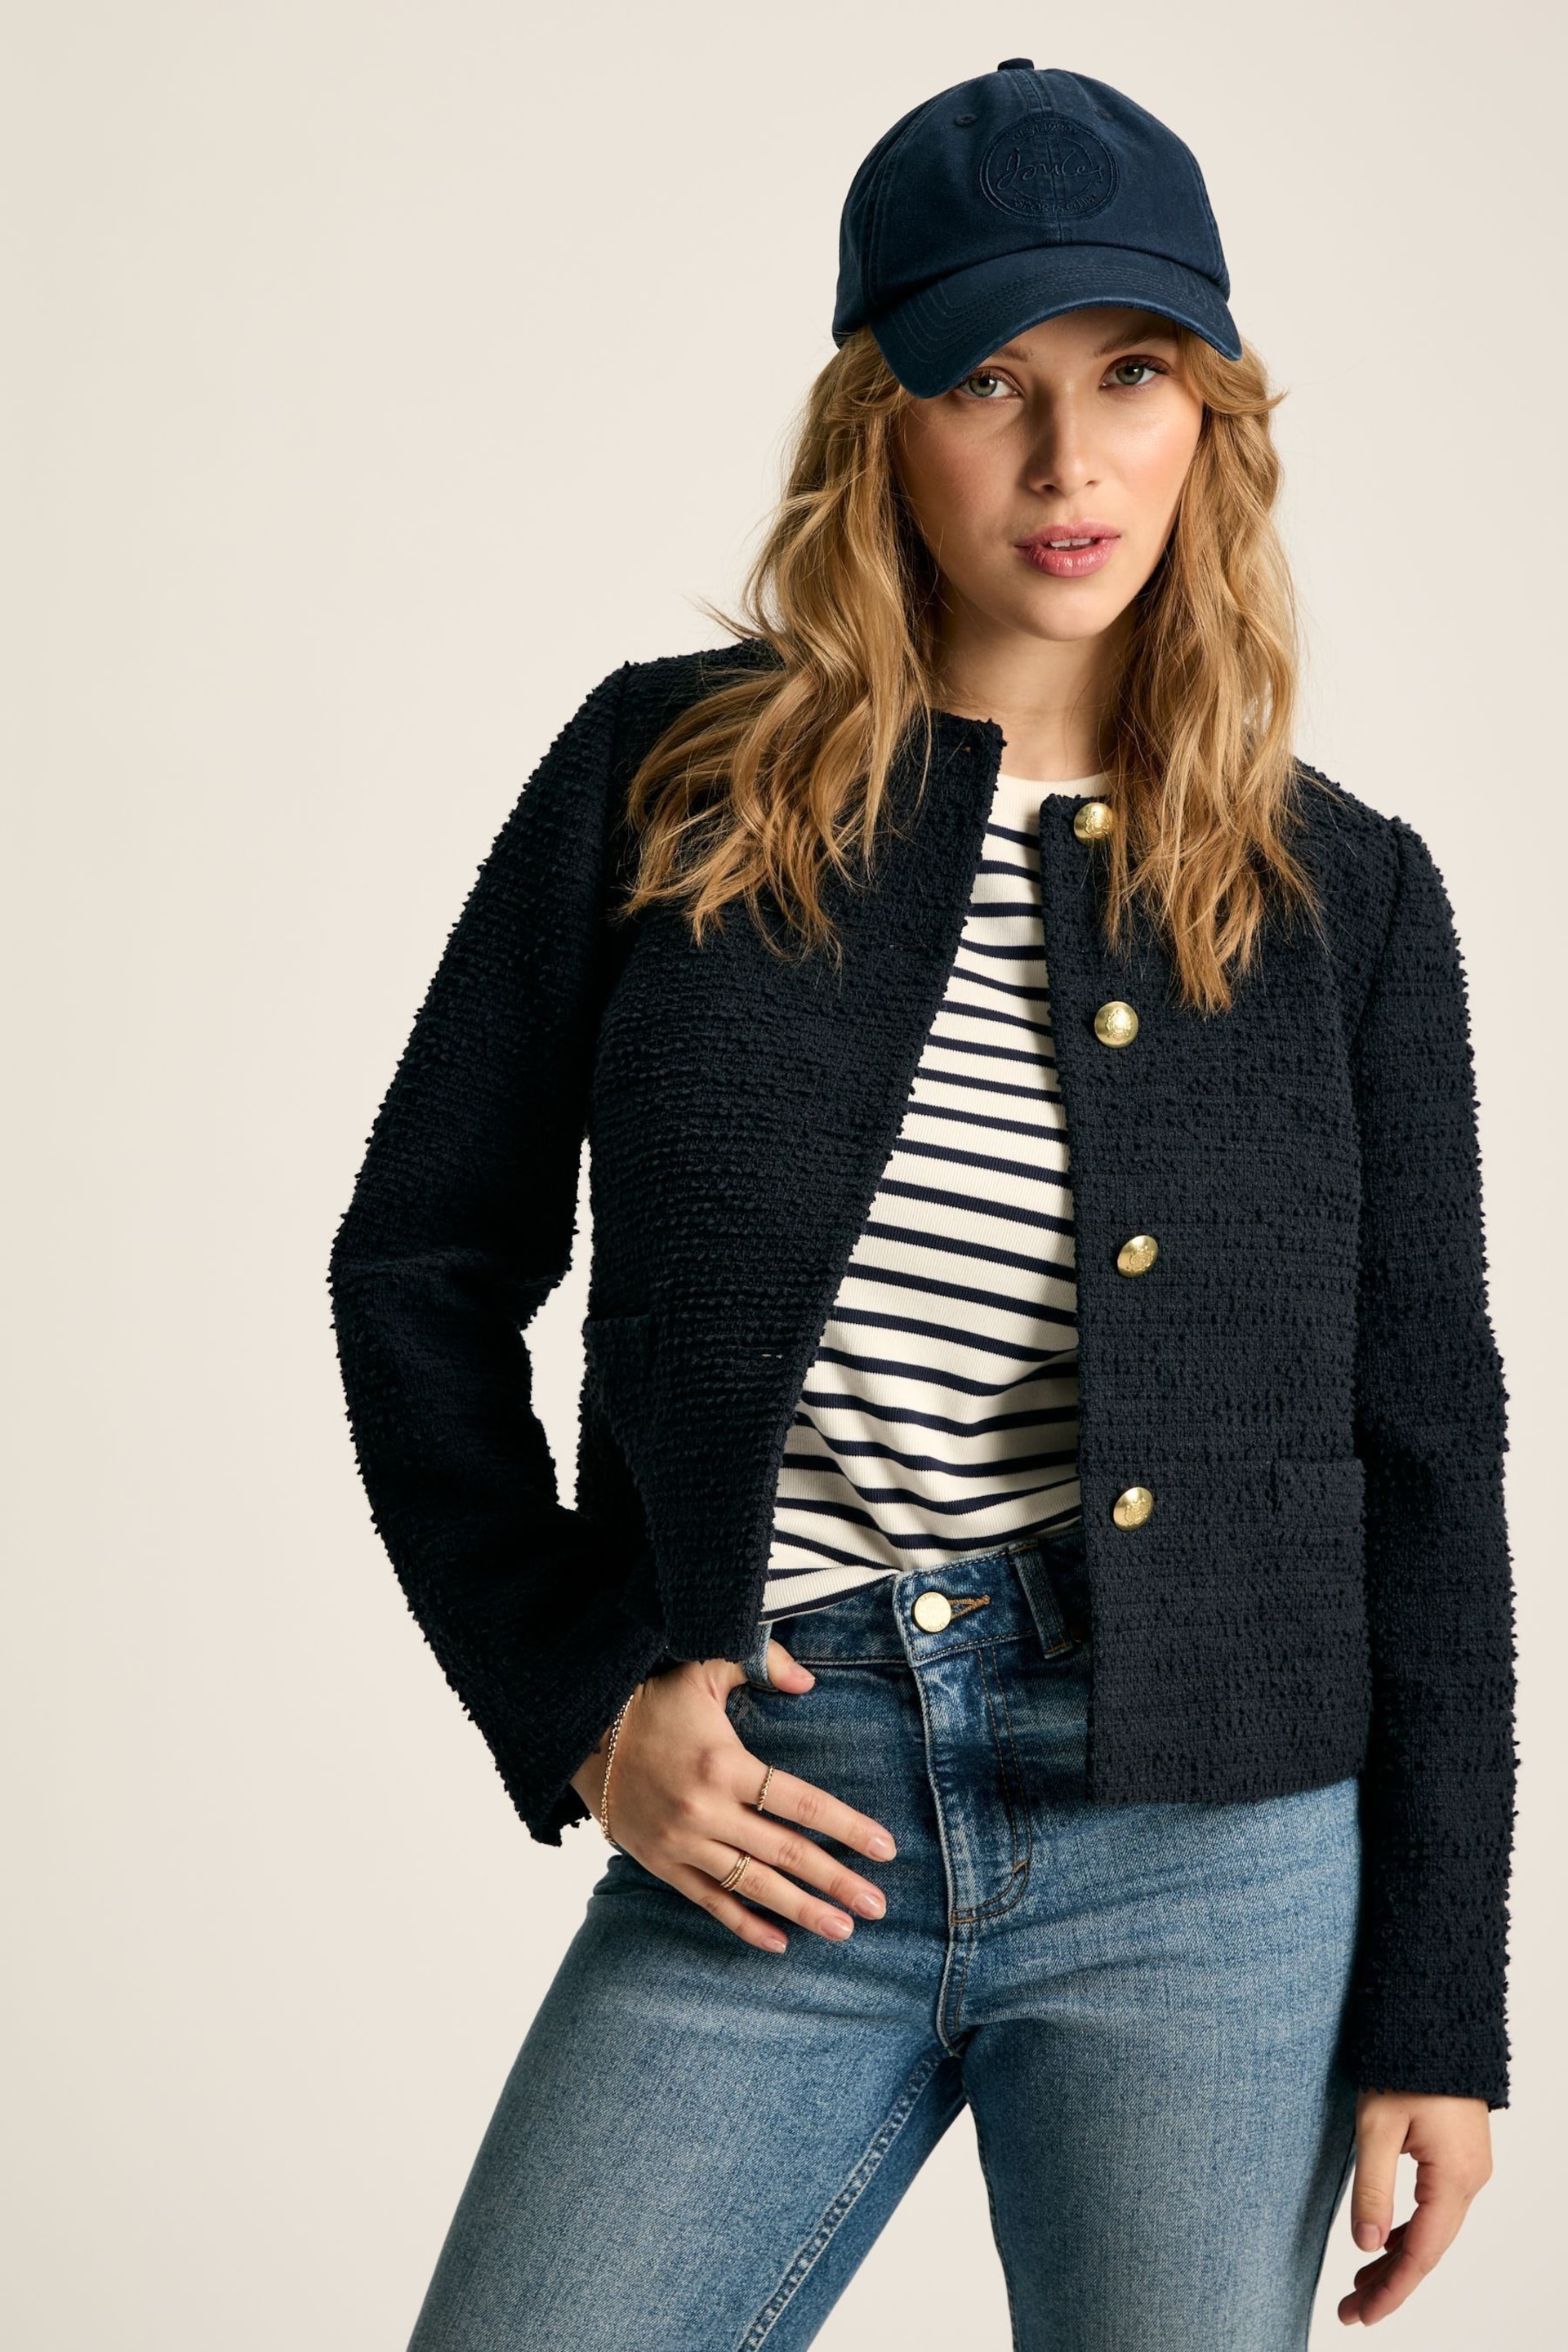 Joules Hampstead Navy Boucle Jacket - Image 3 of 8